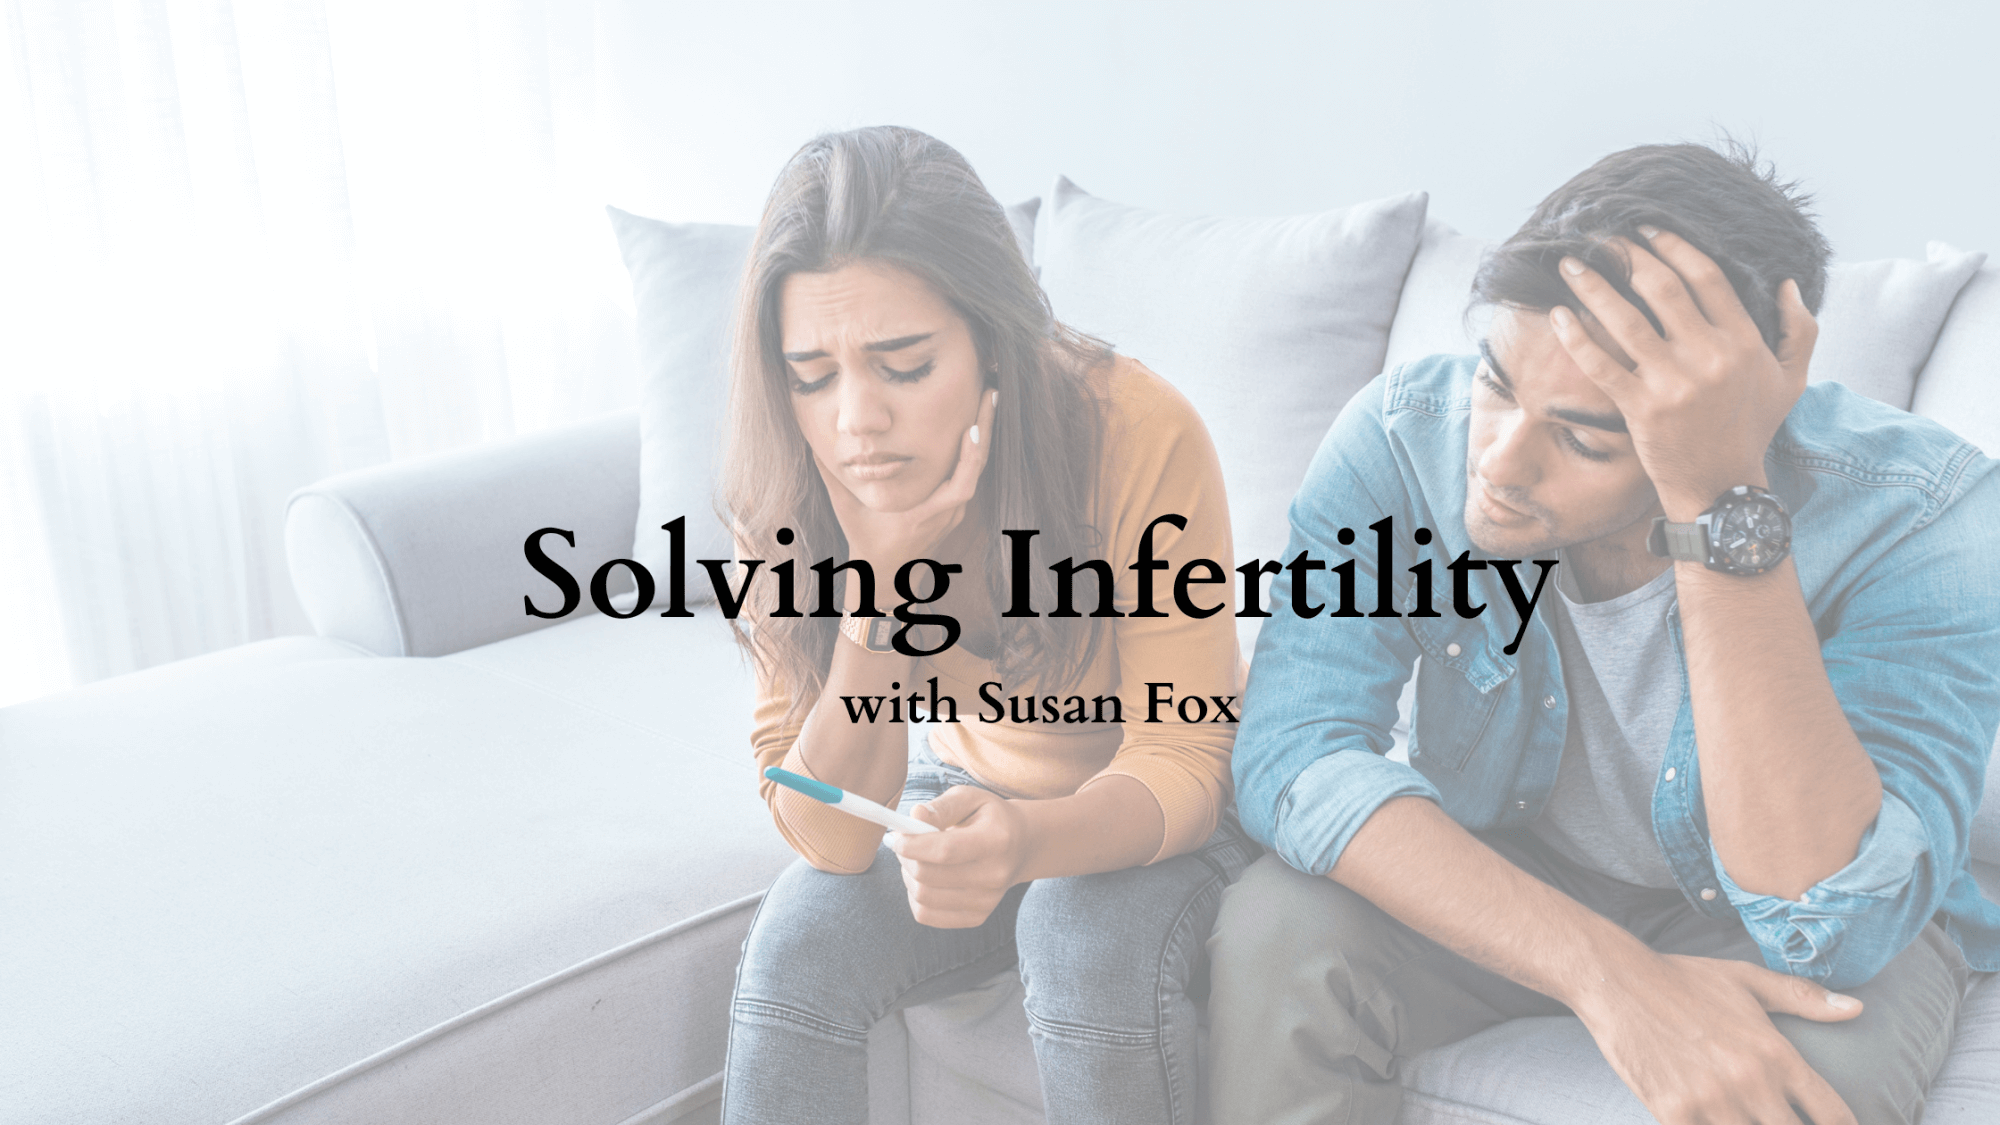 Solving Infertility with Susan Fox, podcast by Functional Nutritionist Andrea Nicholson